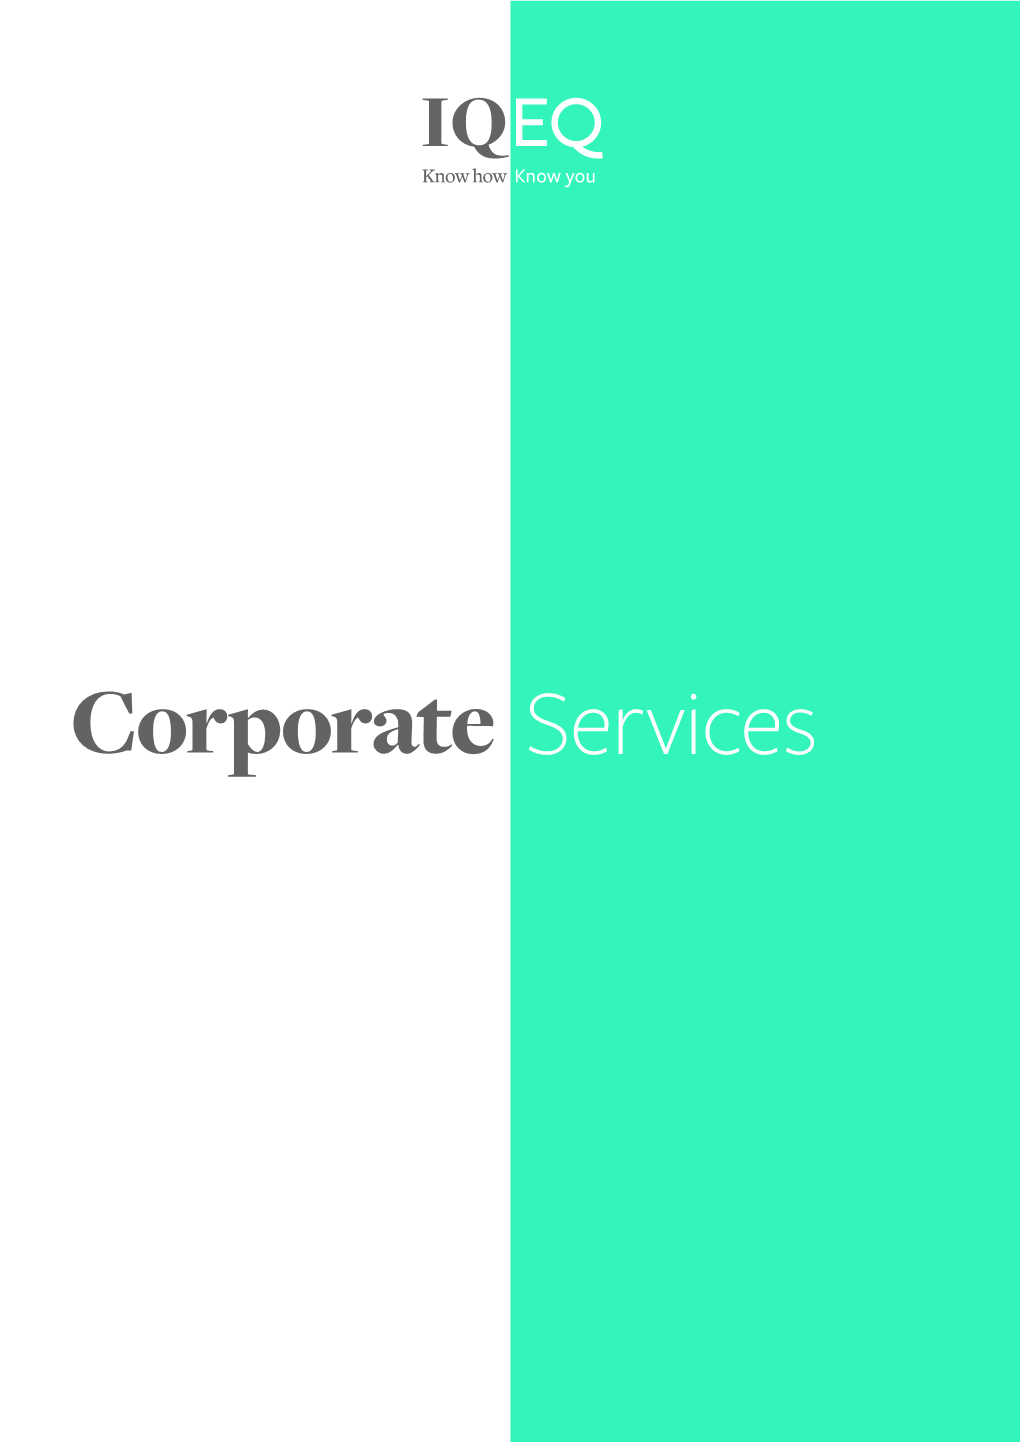 Corporate Services You Need a Corporate Service Provider with the Scale to Operate Across Multiple Jurisdictions and Navigate Complex Regulations